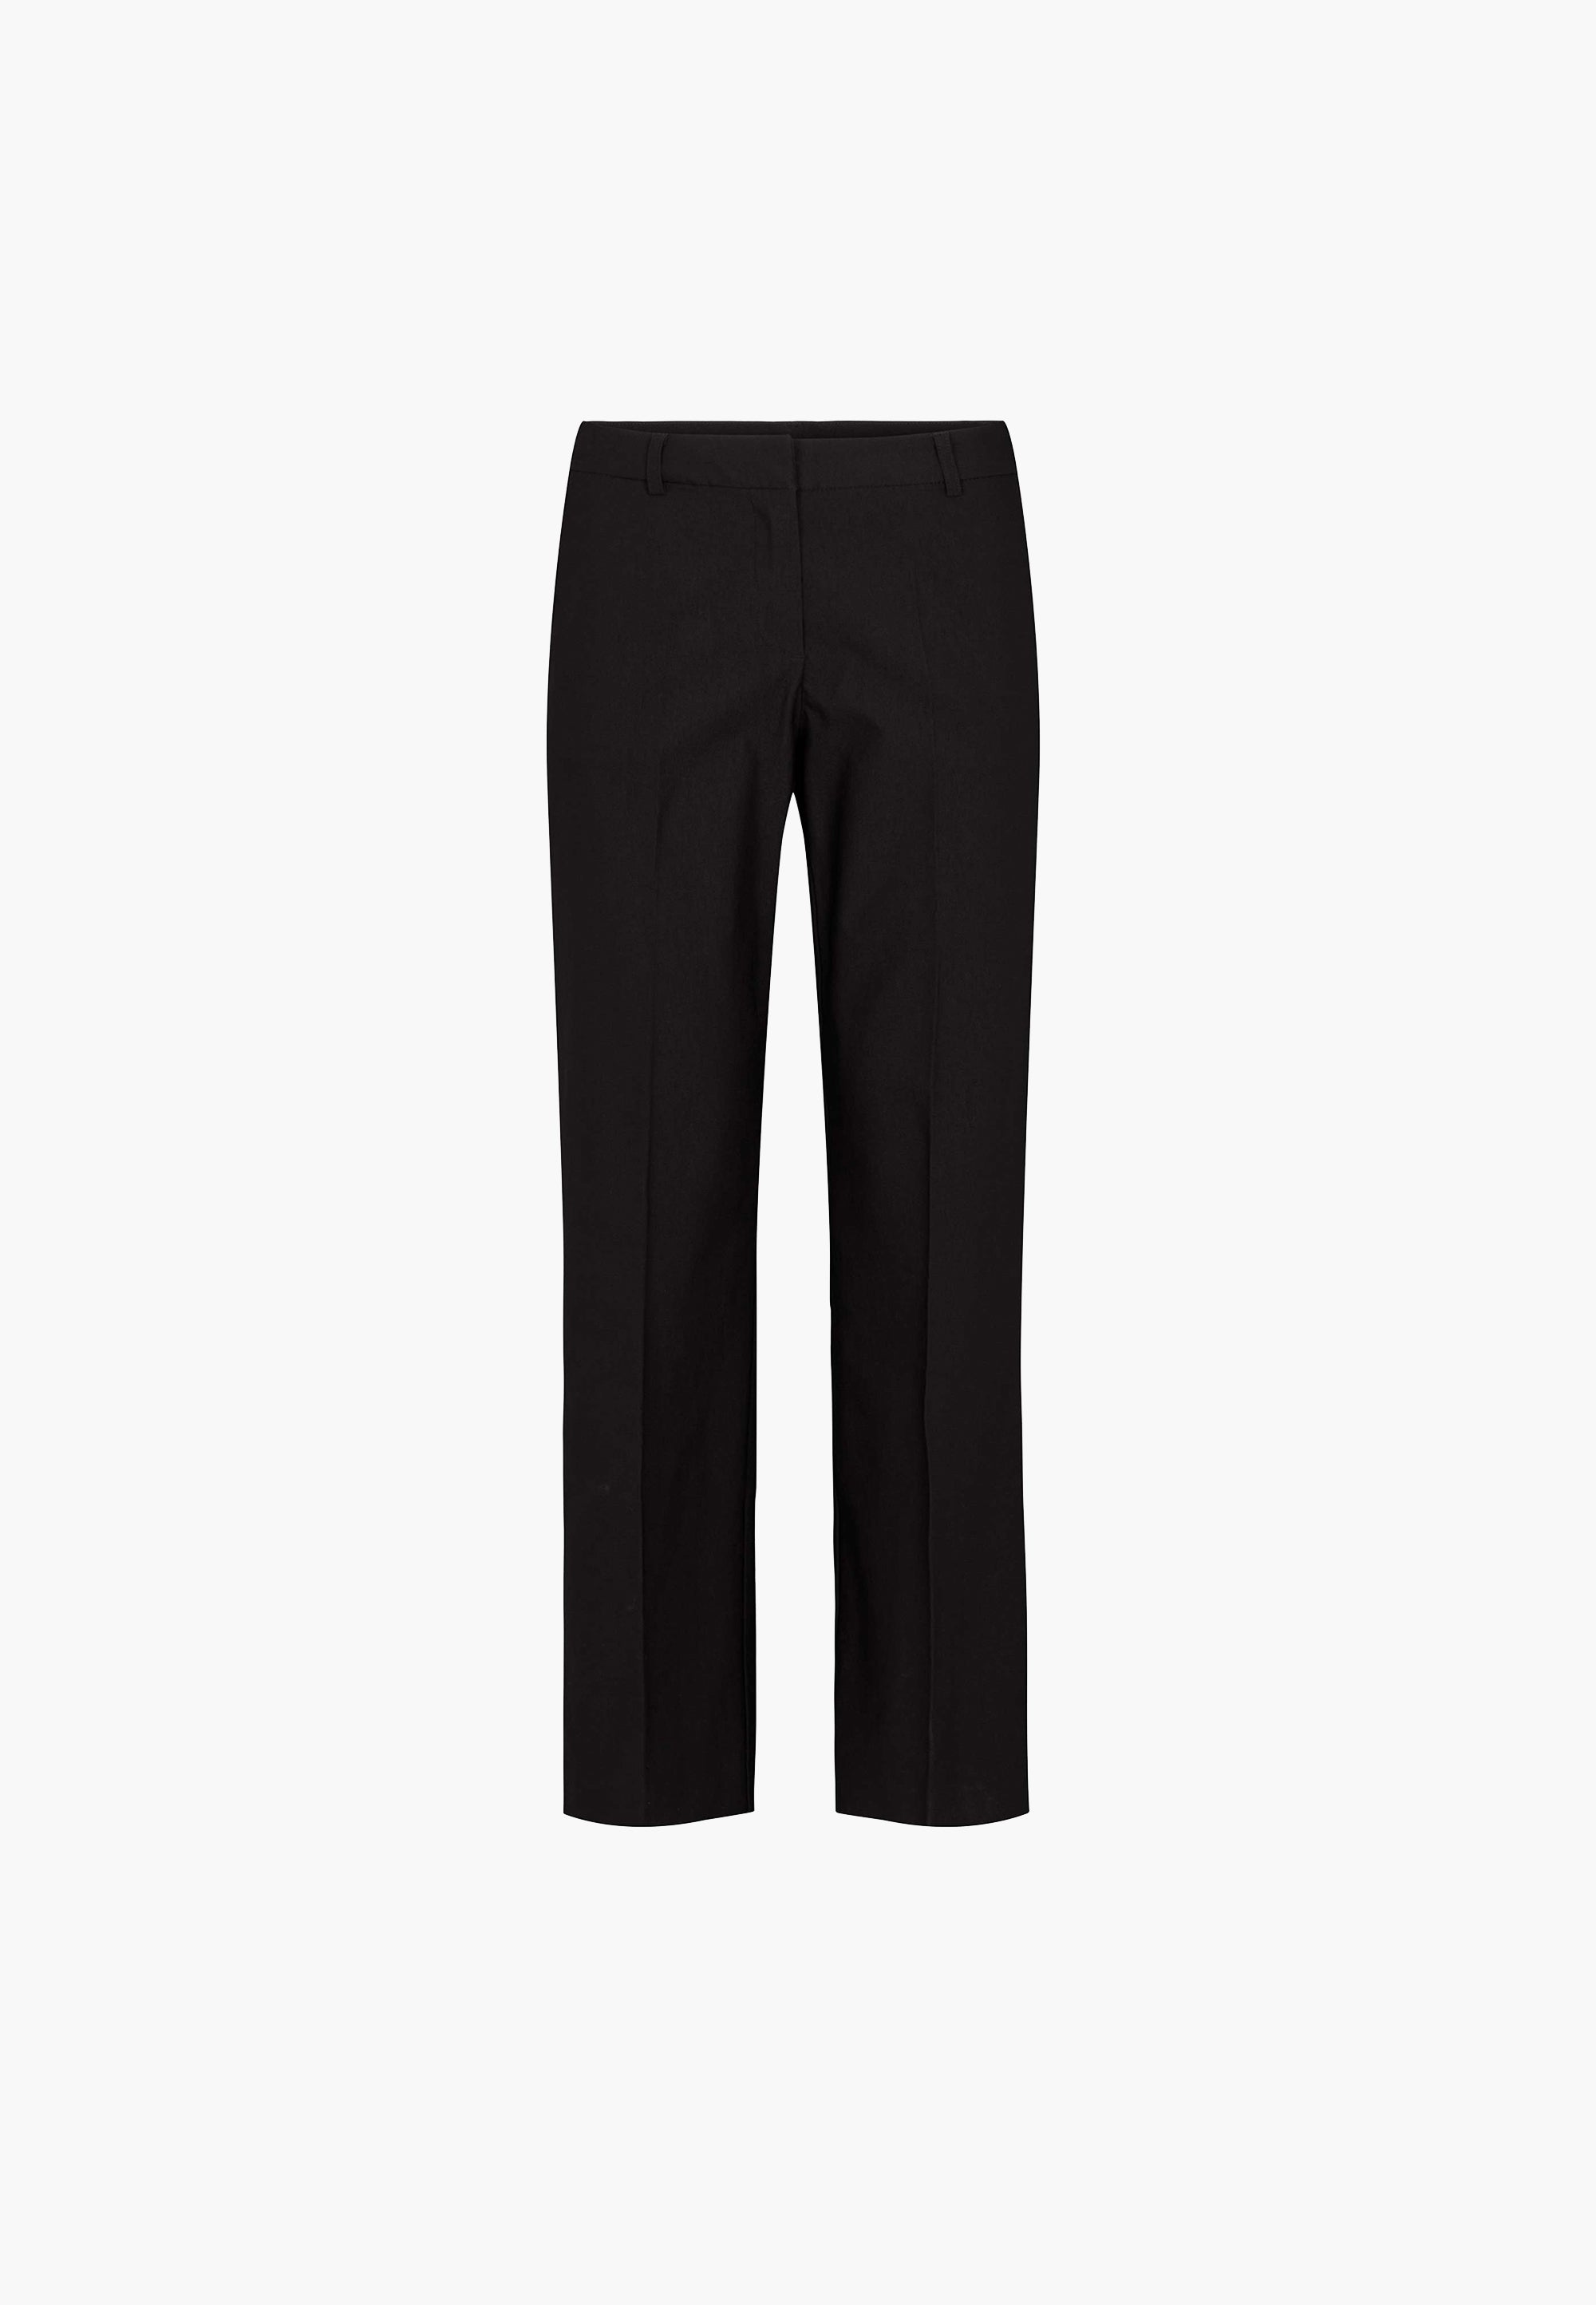 LAURIE  Judy Straight - Medium Length Trousers STRAIGHT 99971 Black Brushed